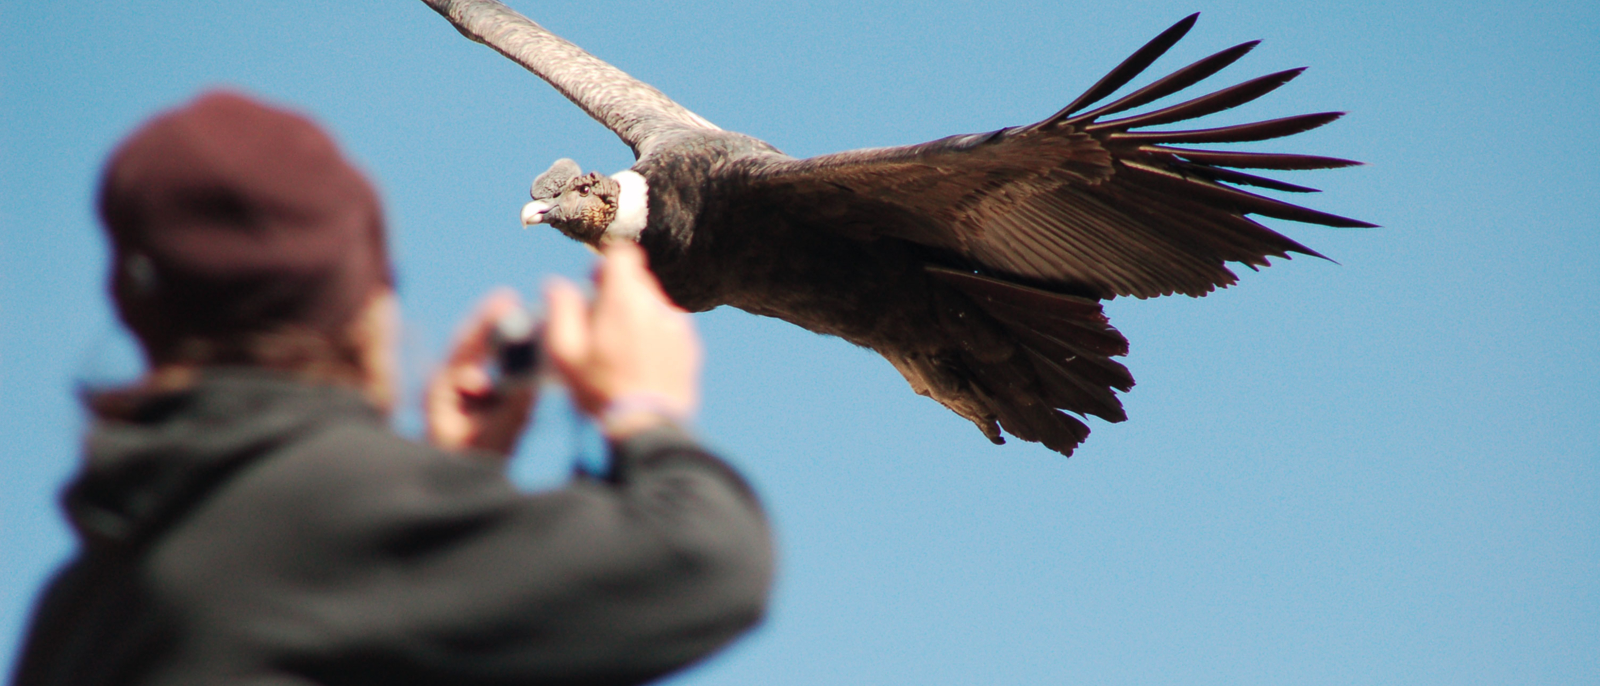 This snapshot shows the bigness of the condors. I took this picture over the Colca Canyon in Peru.